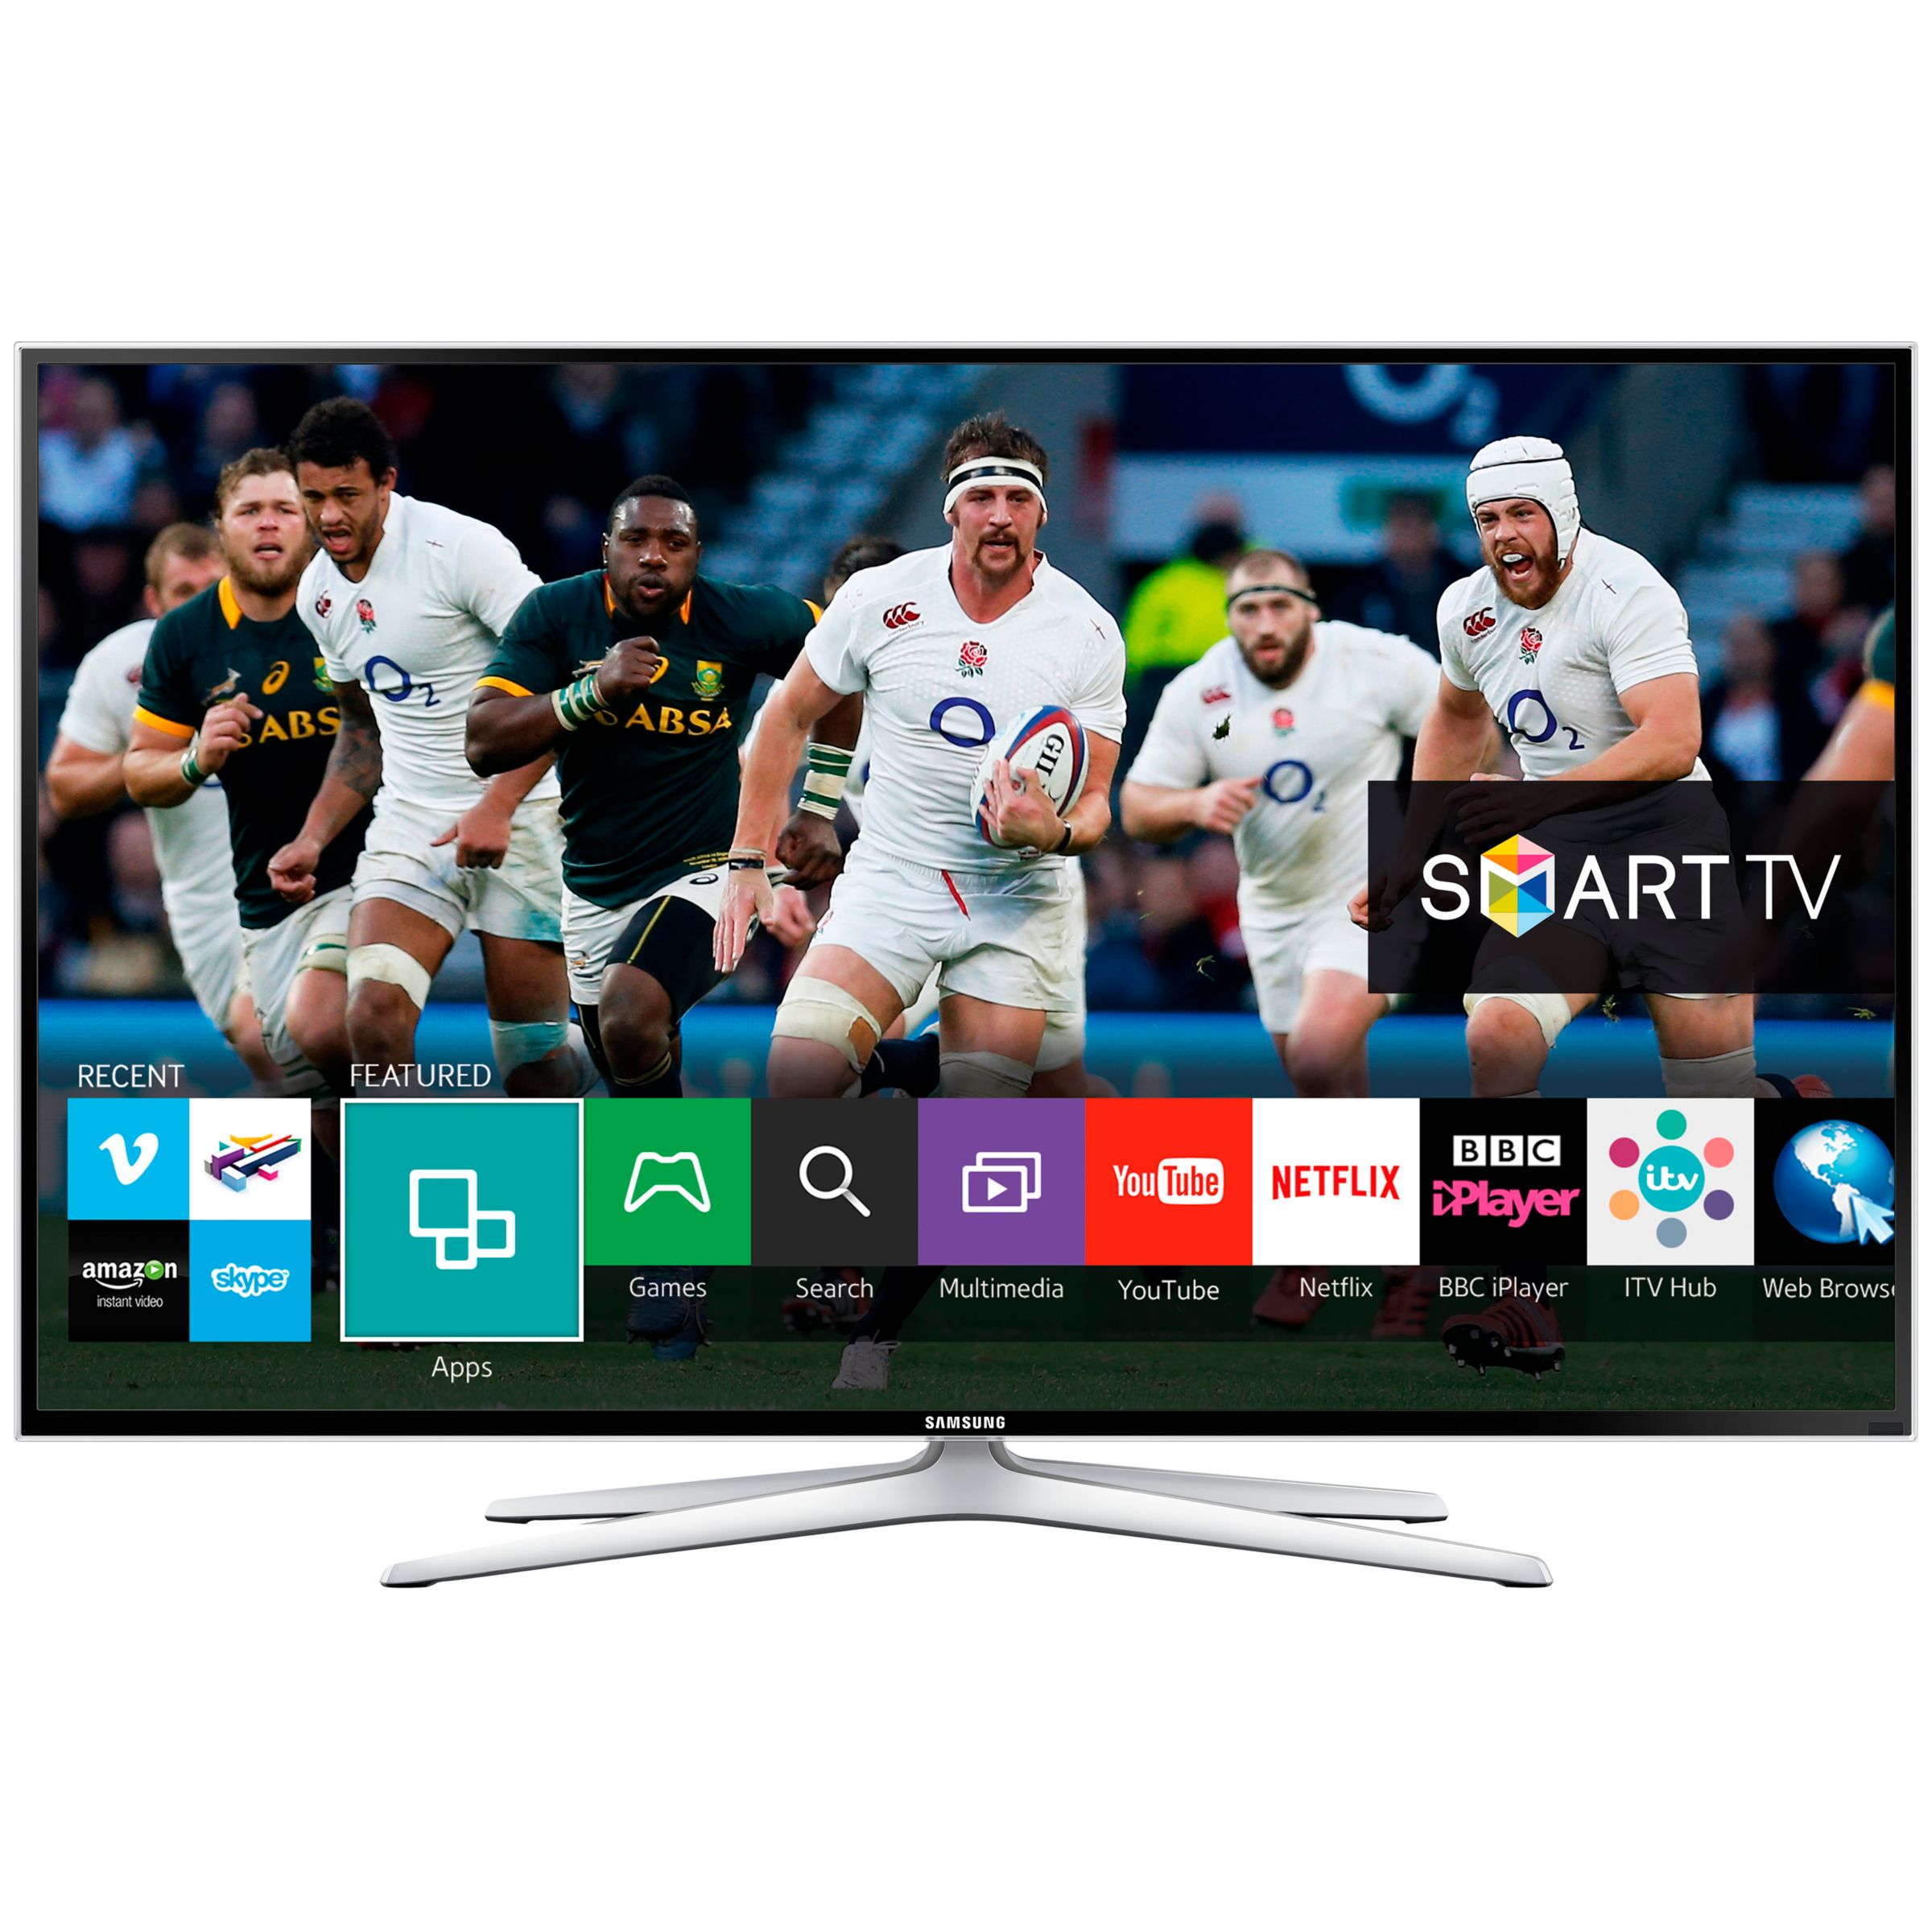 Samsung UE32H6400 LED HD 1080p 3D Smart TV, 32" with Freeview HD, Voice Control & Built-In Wi-Fi